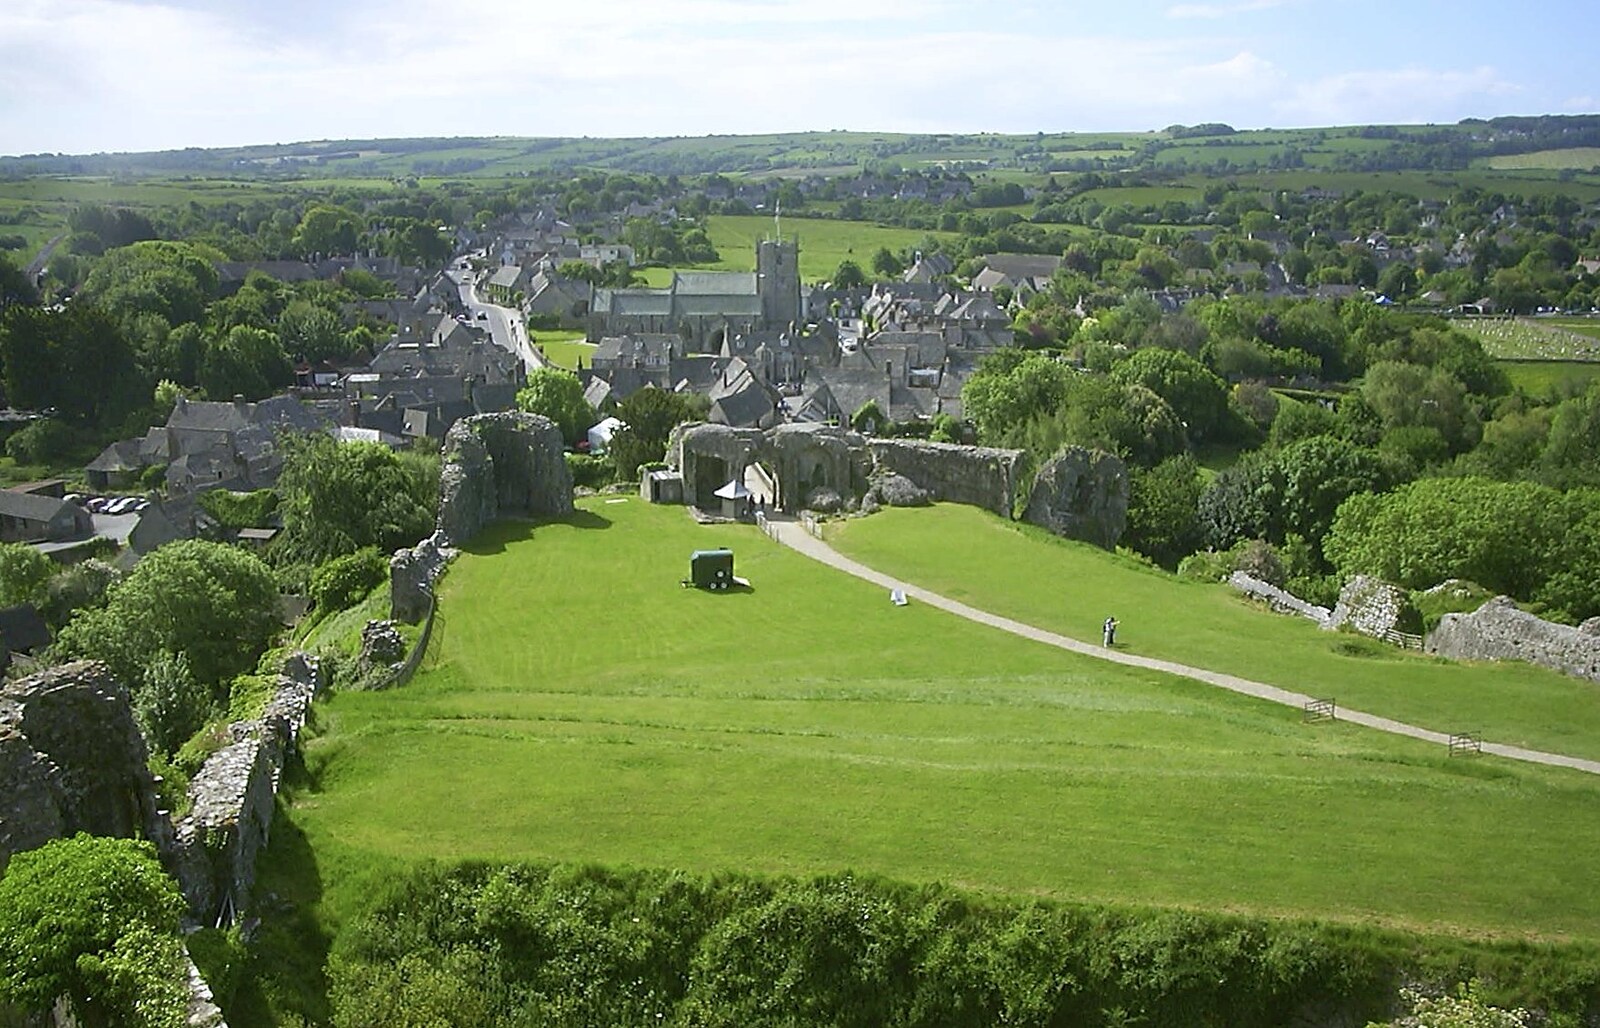 Corfe Castle Camping, Corfe, Dorset - 30th May 2004: A view of Corfe from the castle